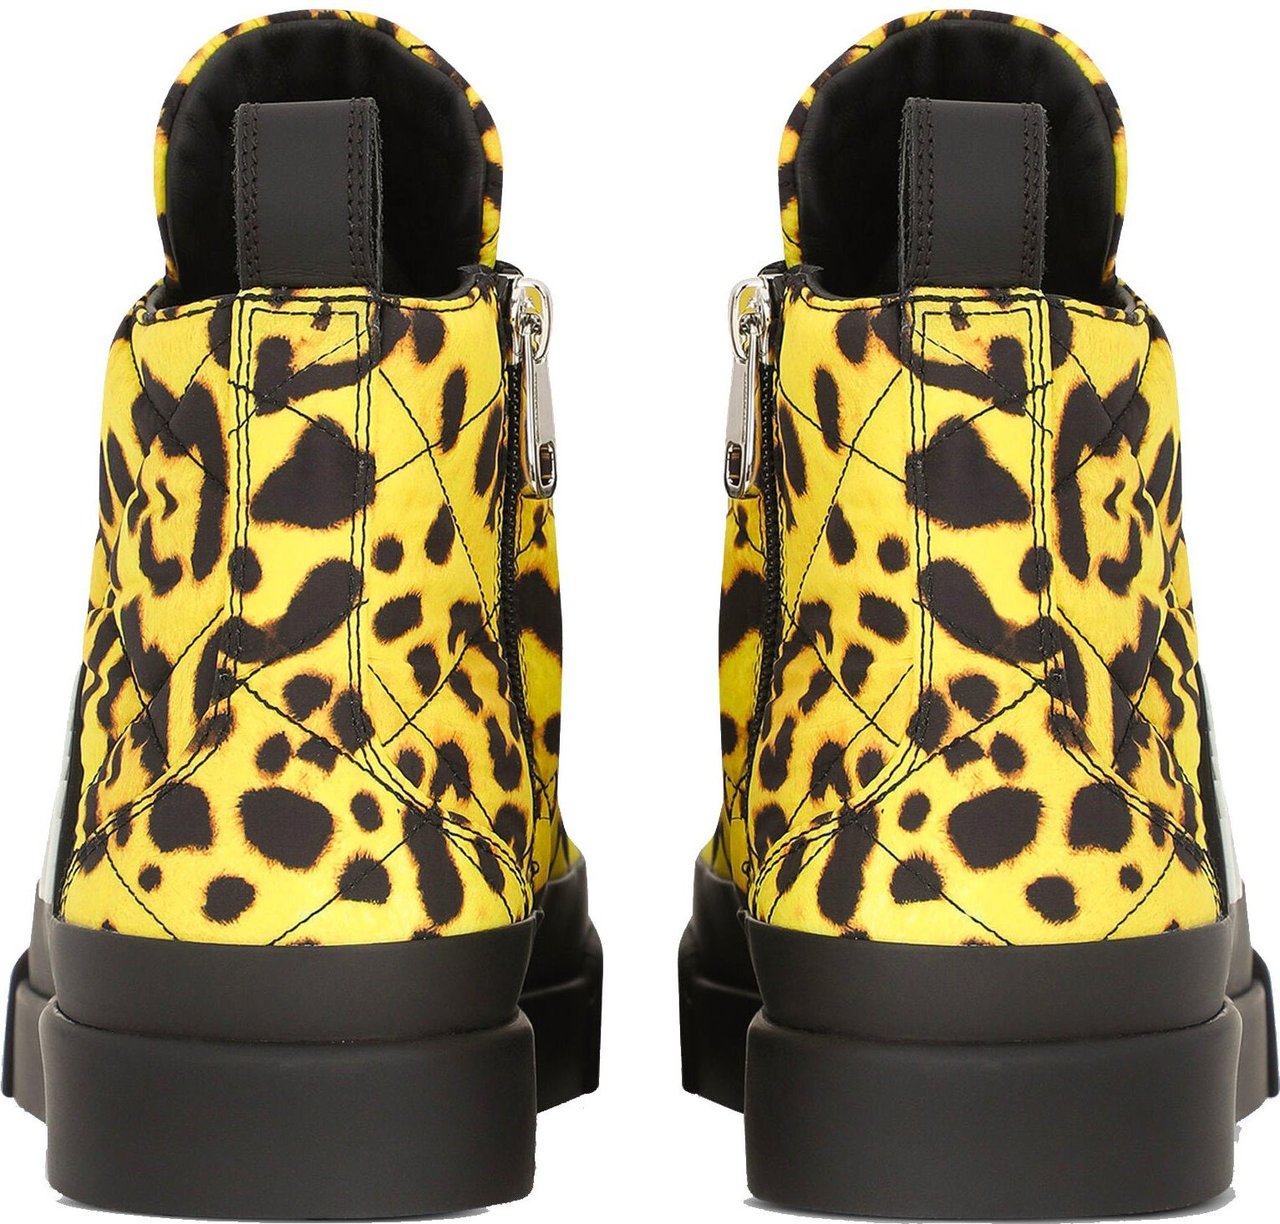 Dolce & Gabbana Dolce & Gabbana Leopard Quilted Sneakers Geel